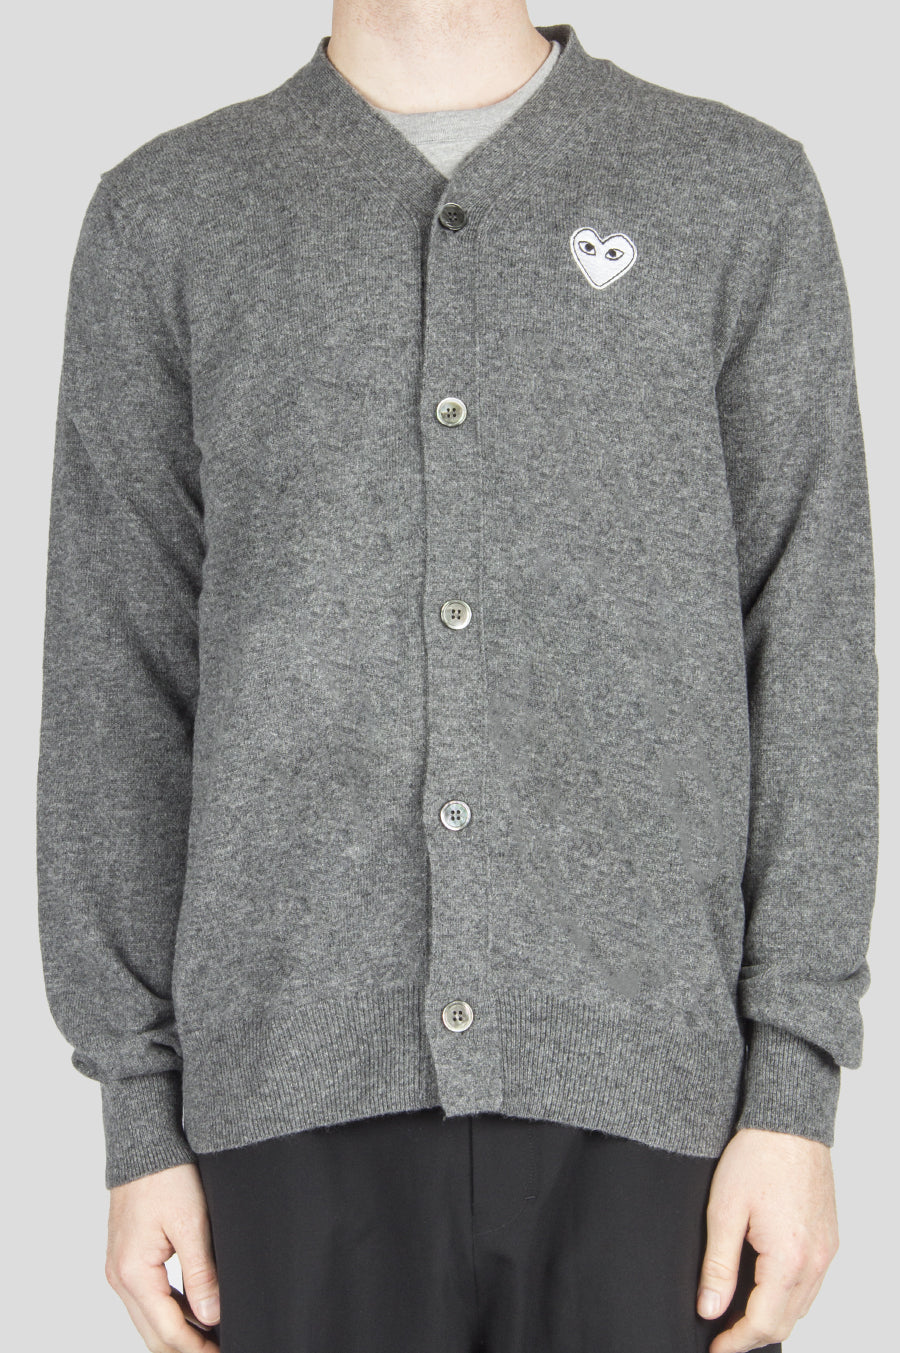 DES GARCONS PLAY CARDIGAN GREY WHITE HEART – BLENDS